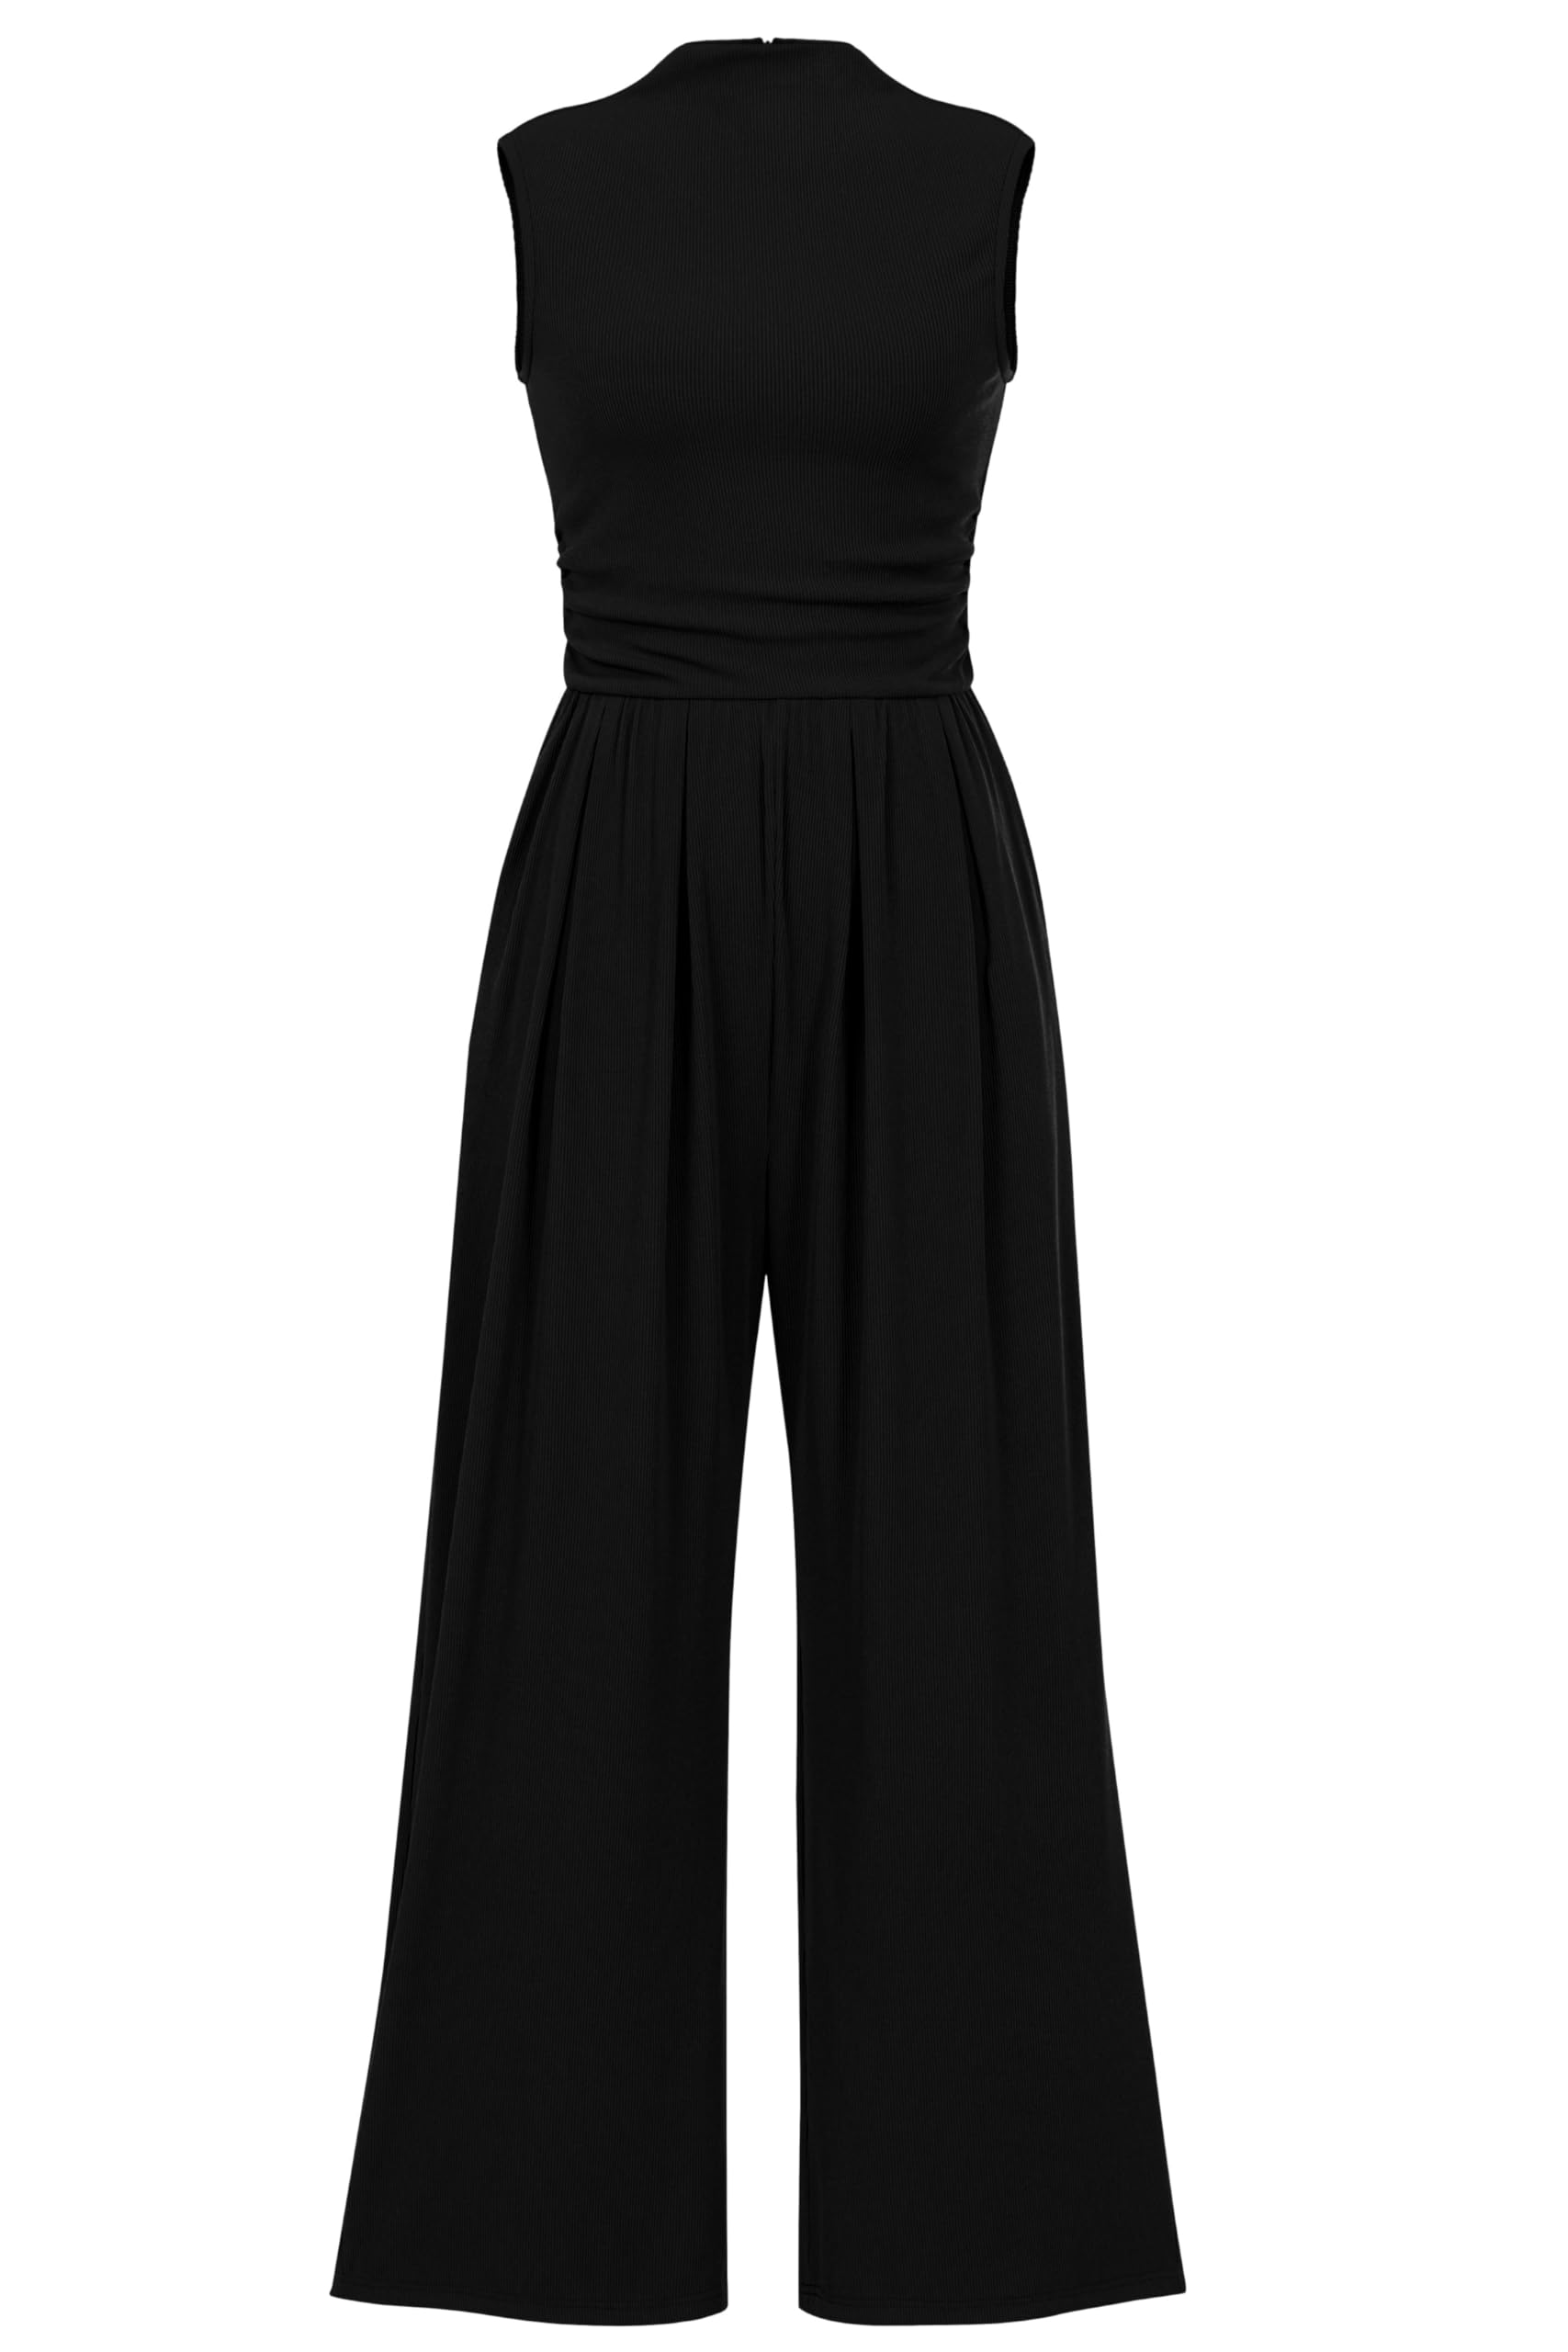 Womens Summer Jumpsuits Dressy Casual One Piece Outfits Sleeveless Mock Neck Wide Leg Pants Rompers with Pockets